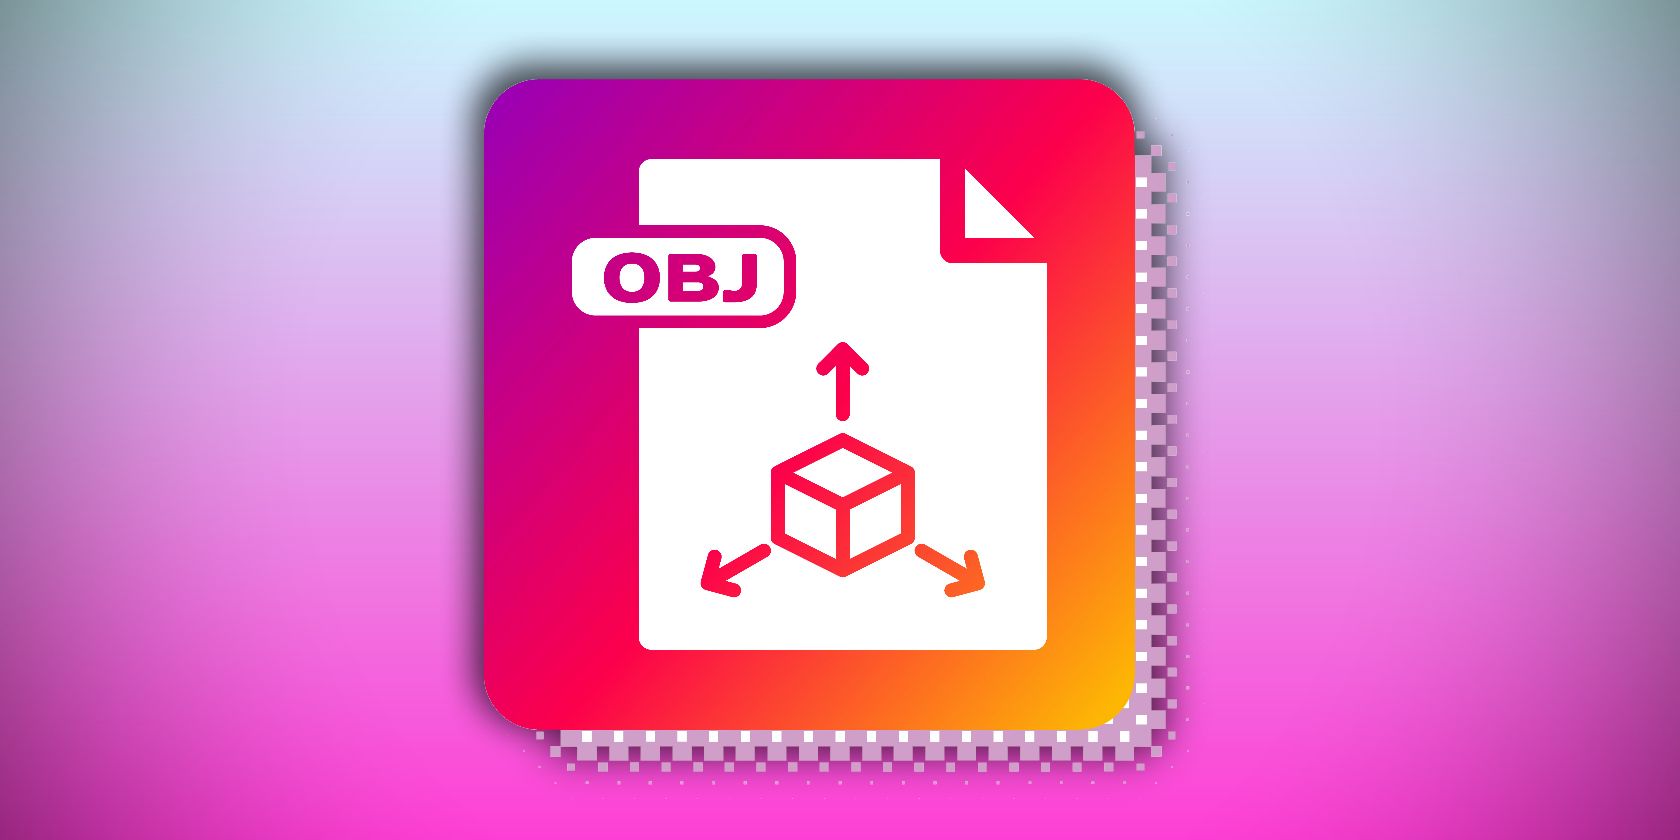 OBJ file logo on gradient background feature